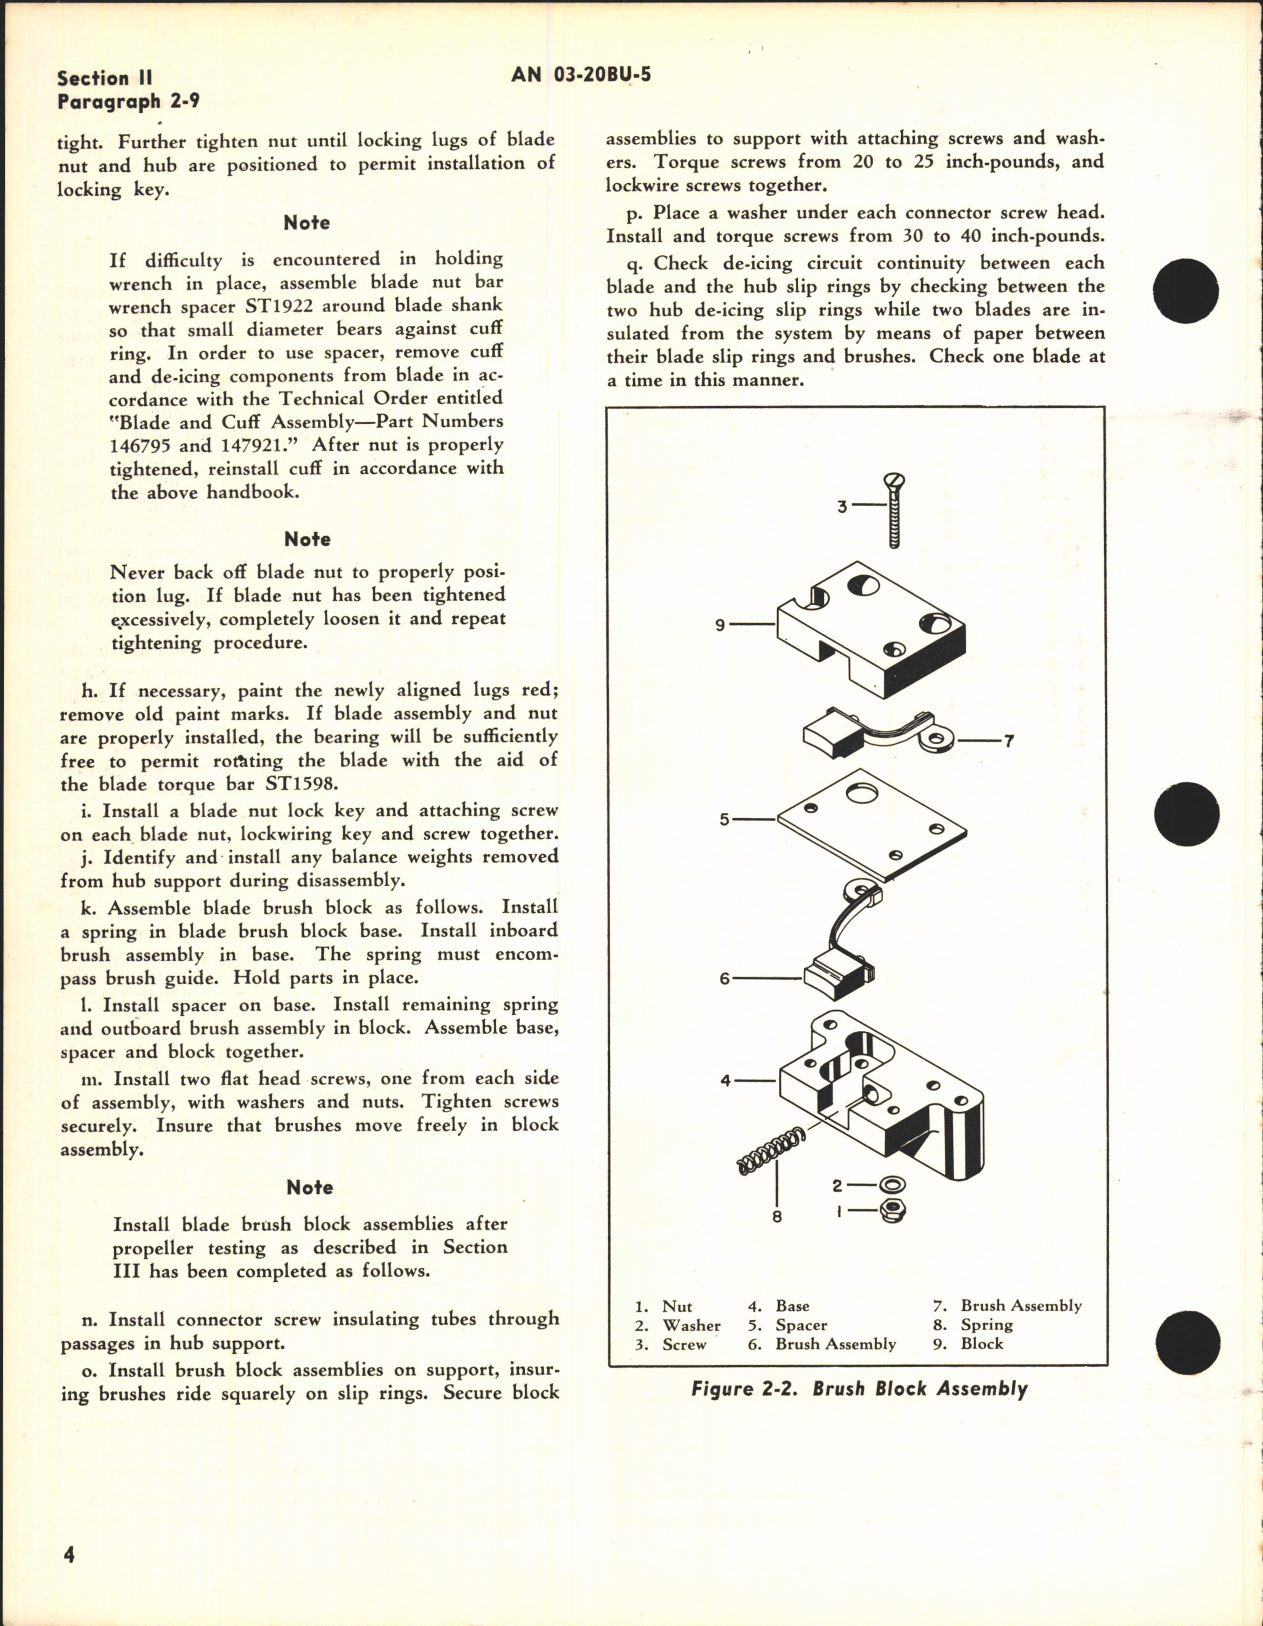 Sample page 8 from AirCorps Library document: Overhaul Instructions for Curtiss Propeller Assembly Models C735S-A2 and C735S-A4